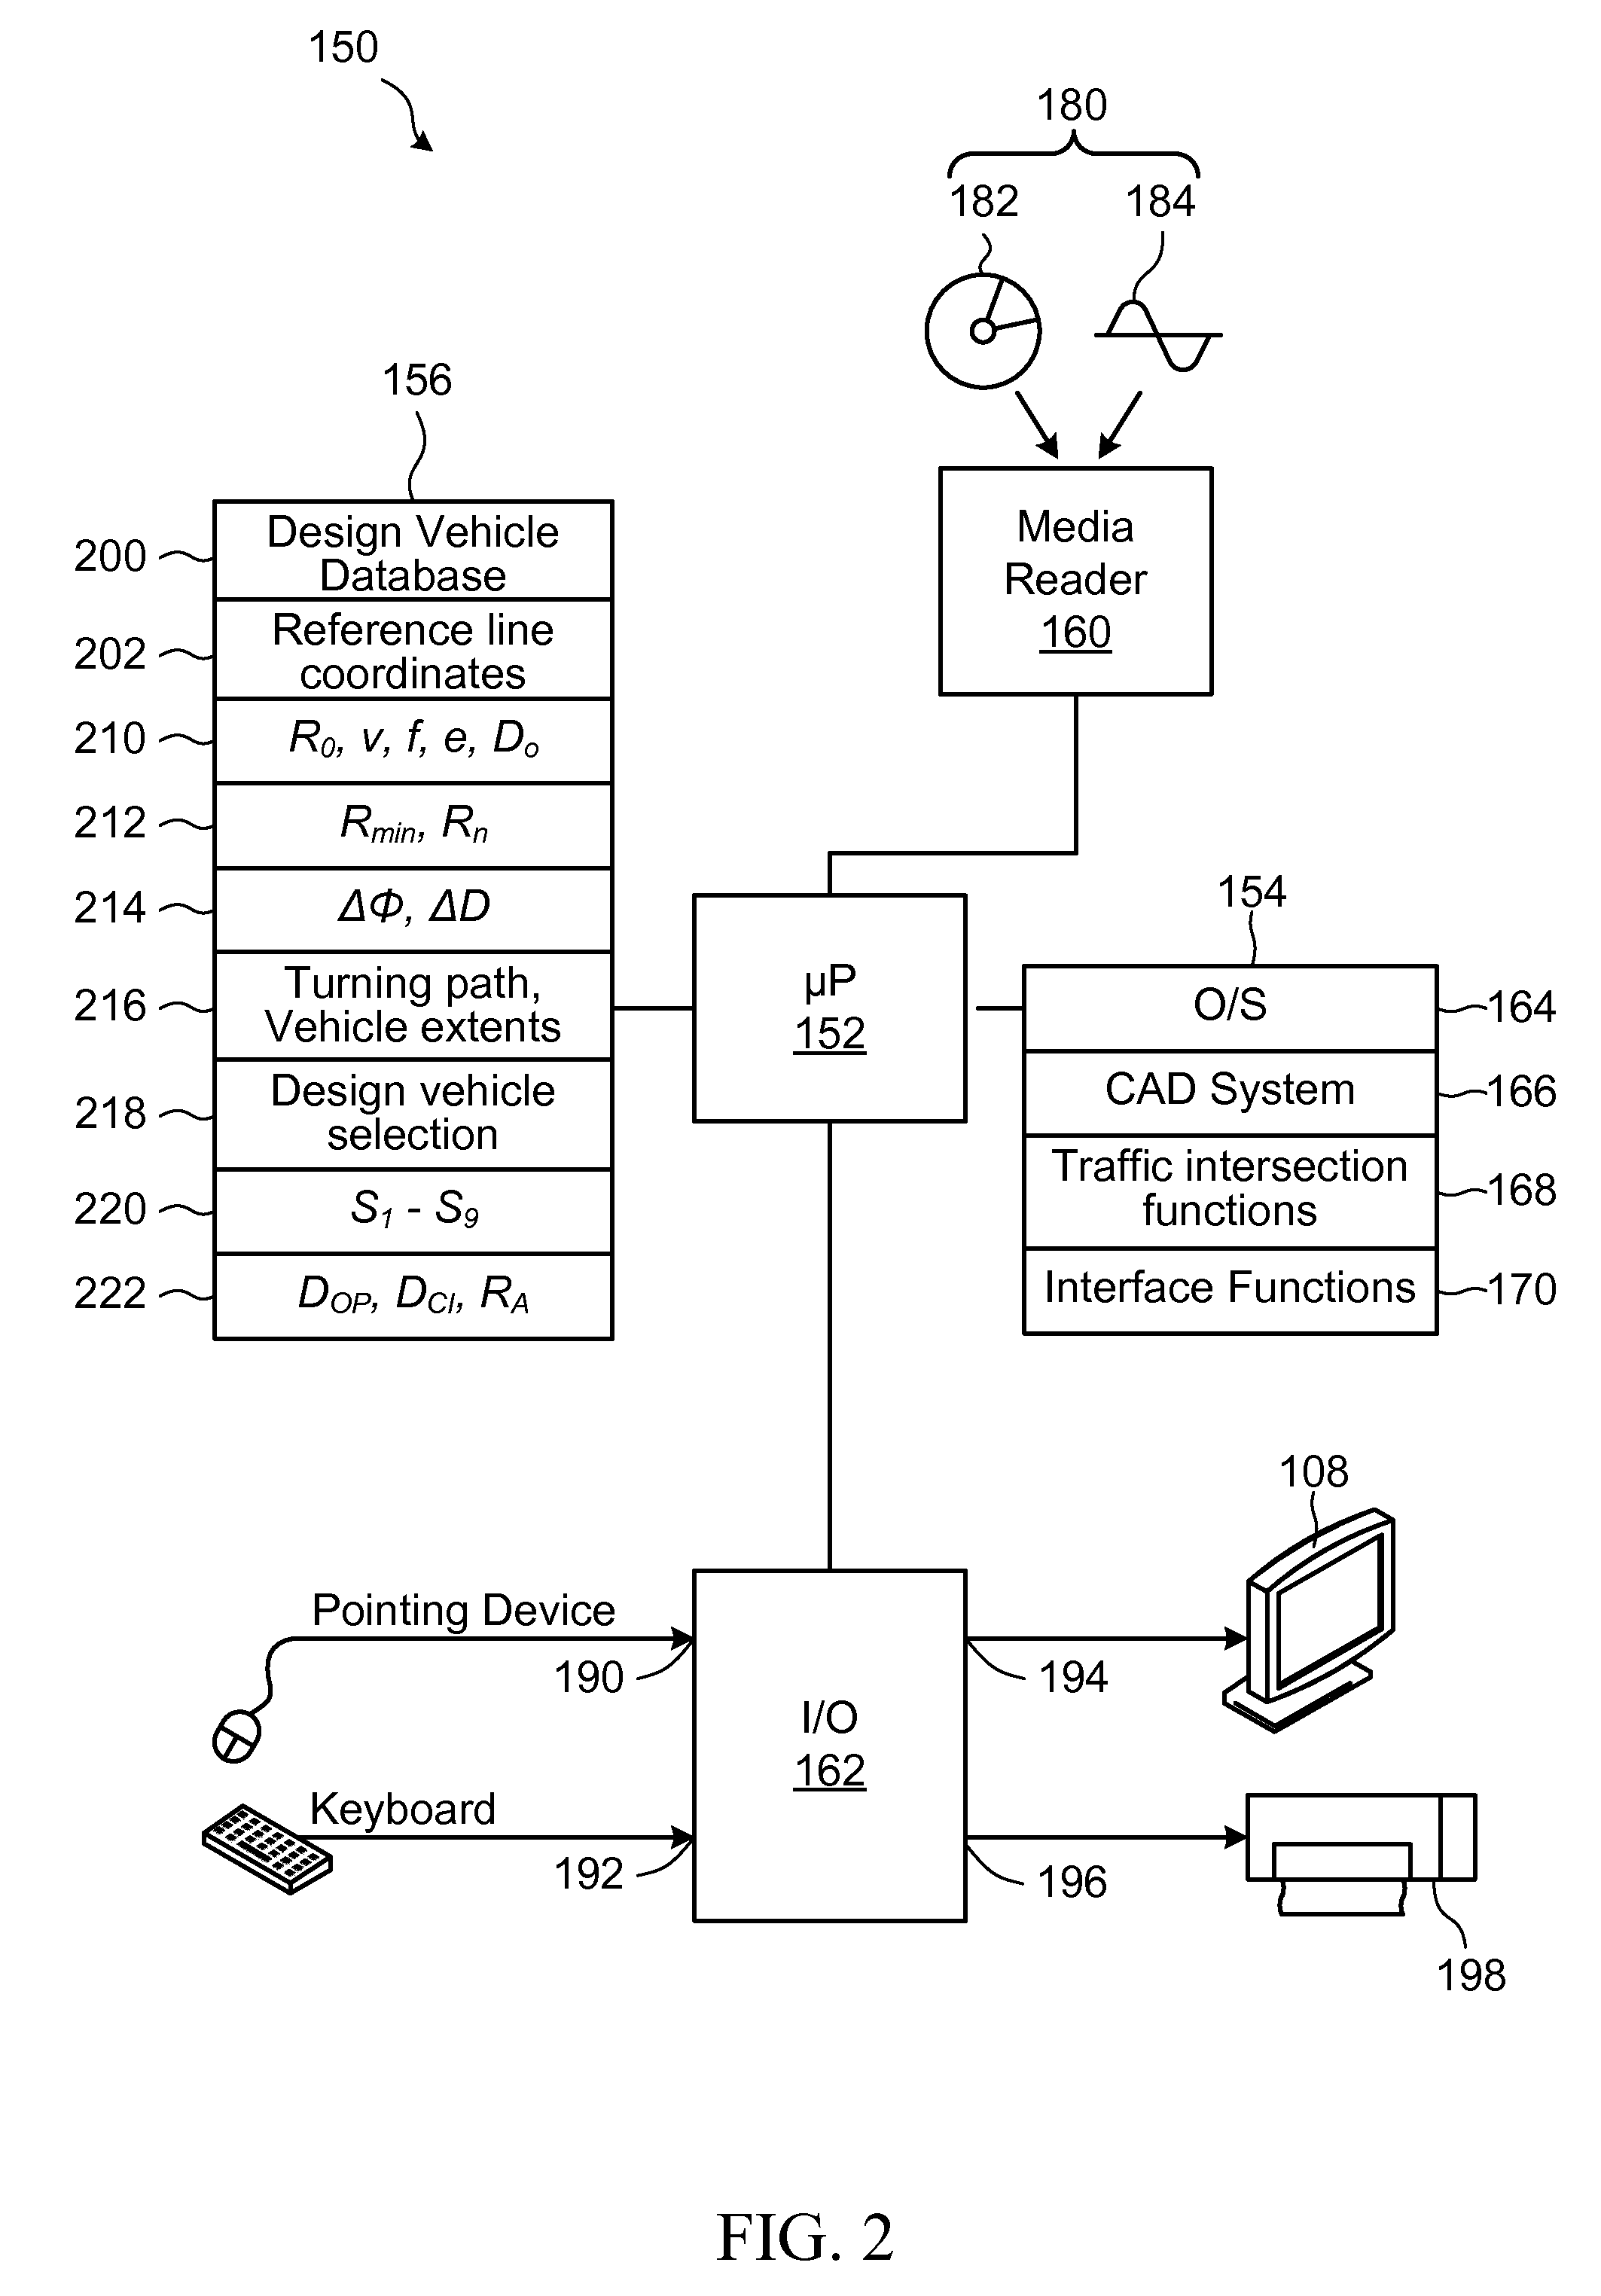 Method and apparatus for displaying a representation of a traffic intersection